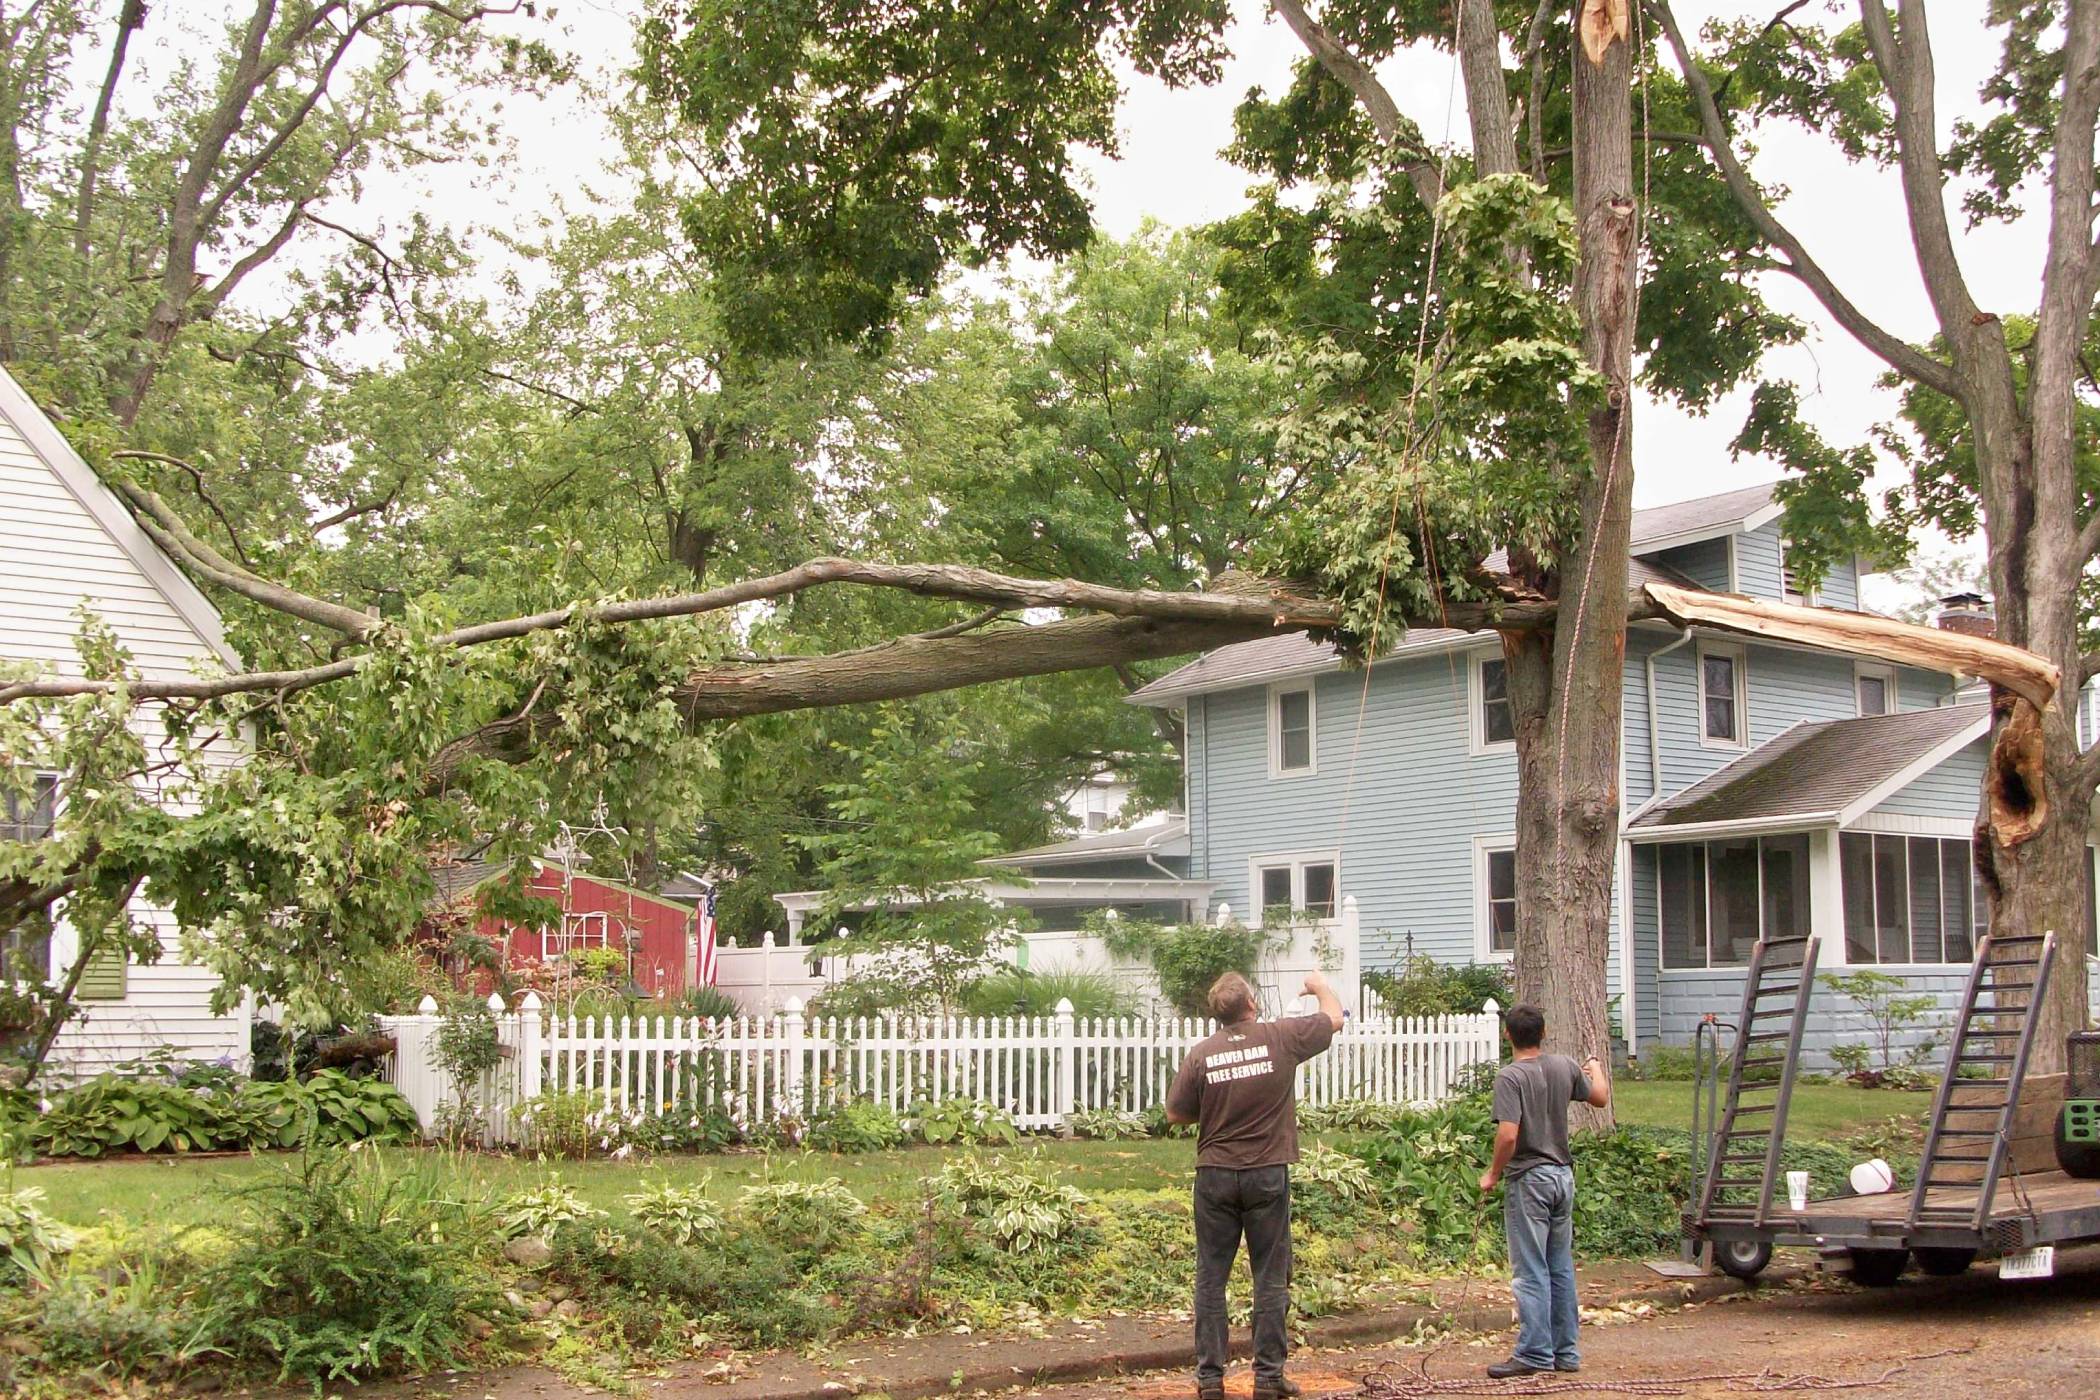 Two men standing in the road in the process of removing a tree.